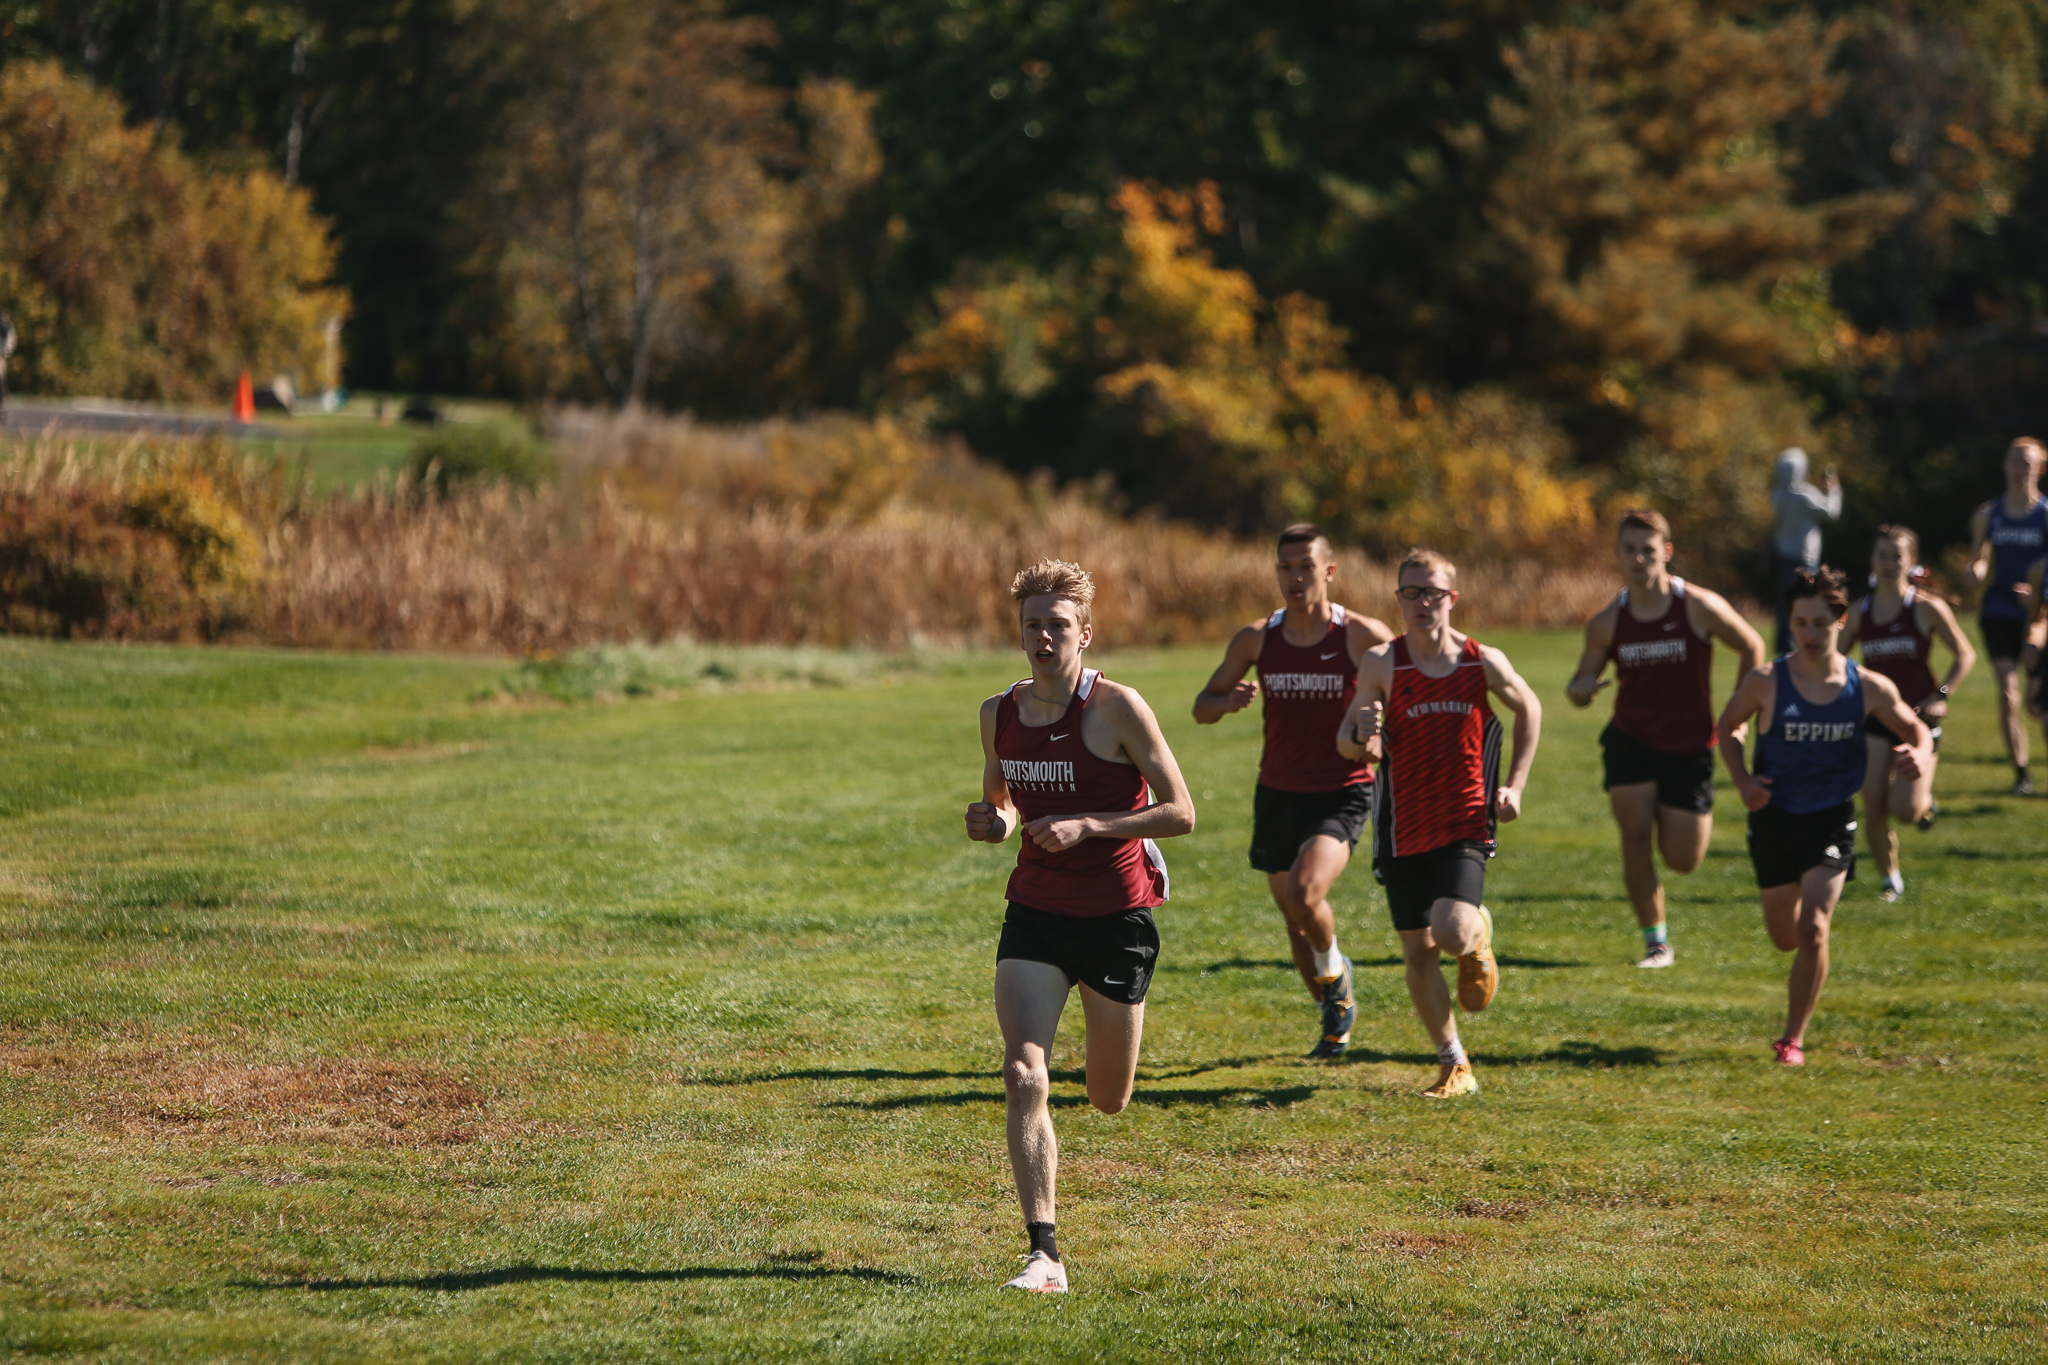 A group of cross country runners running on a grassy field.